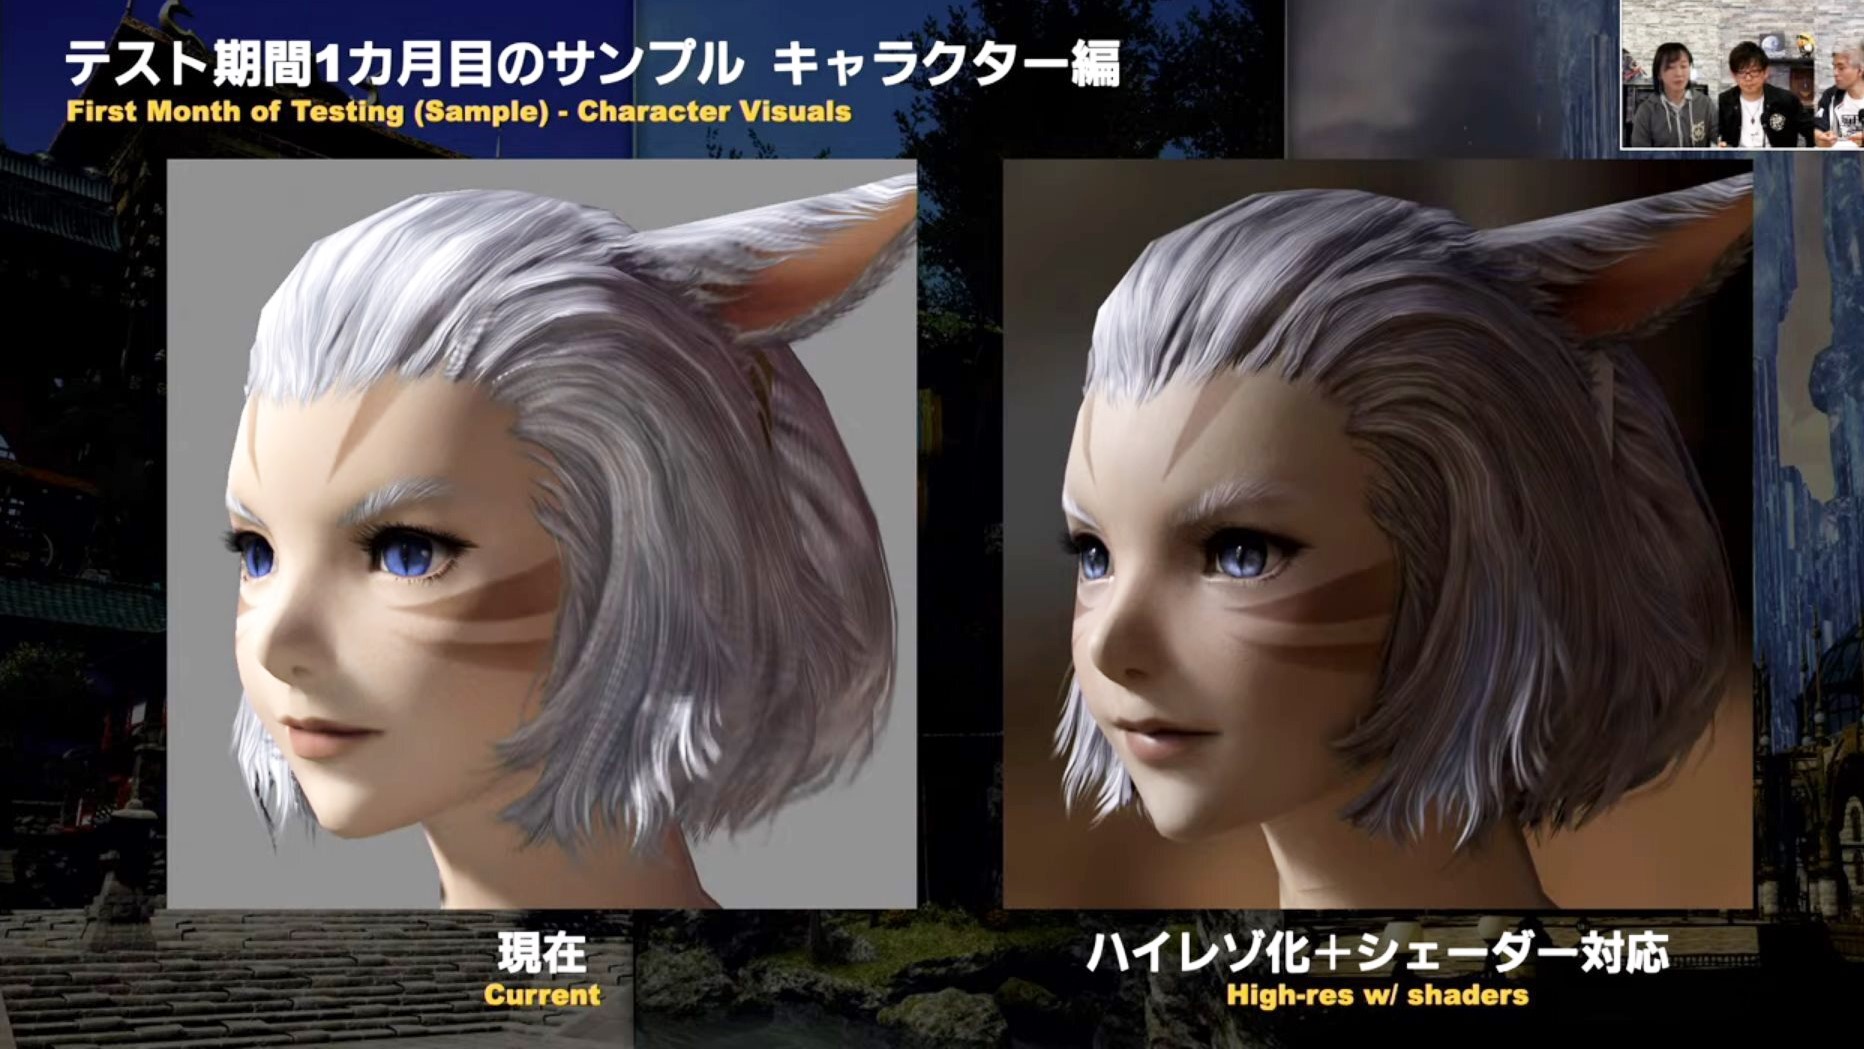 ffxiv-7.0-graphics-update-preview-miqote.jpg